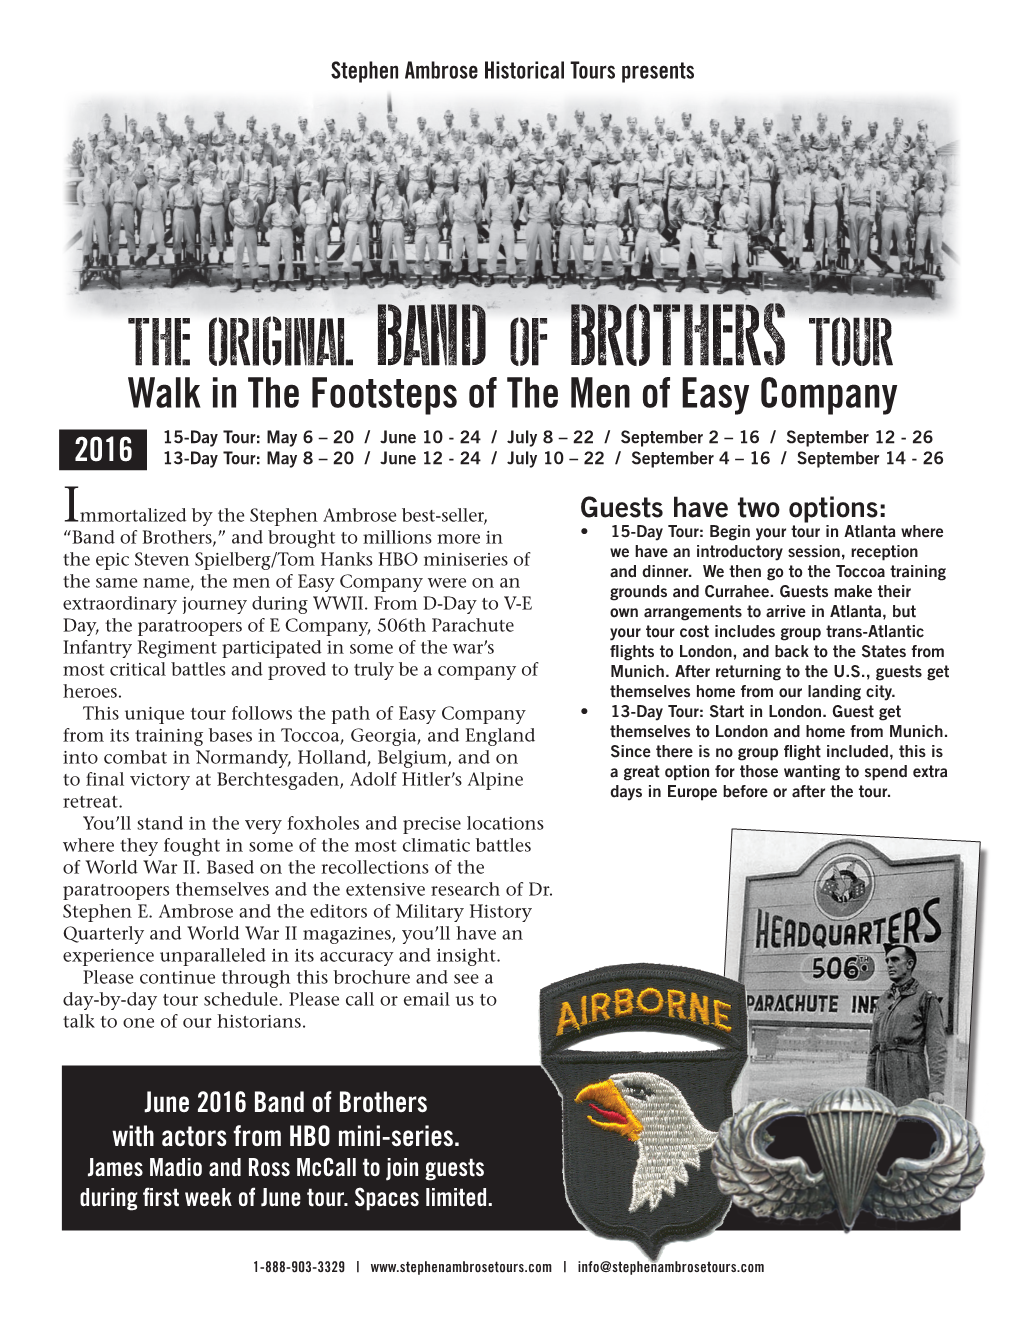 The Original Band of Brothers Tour